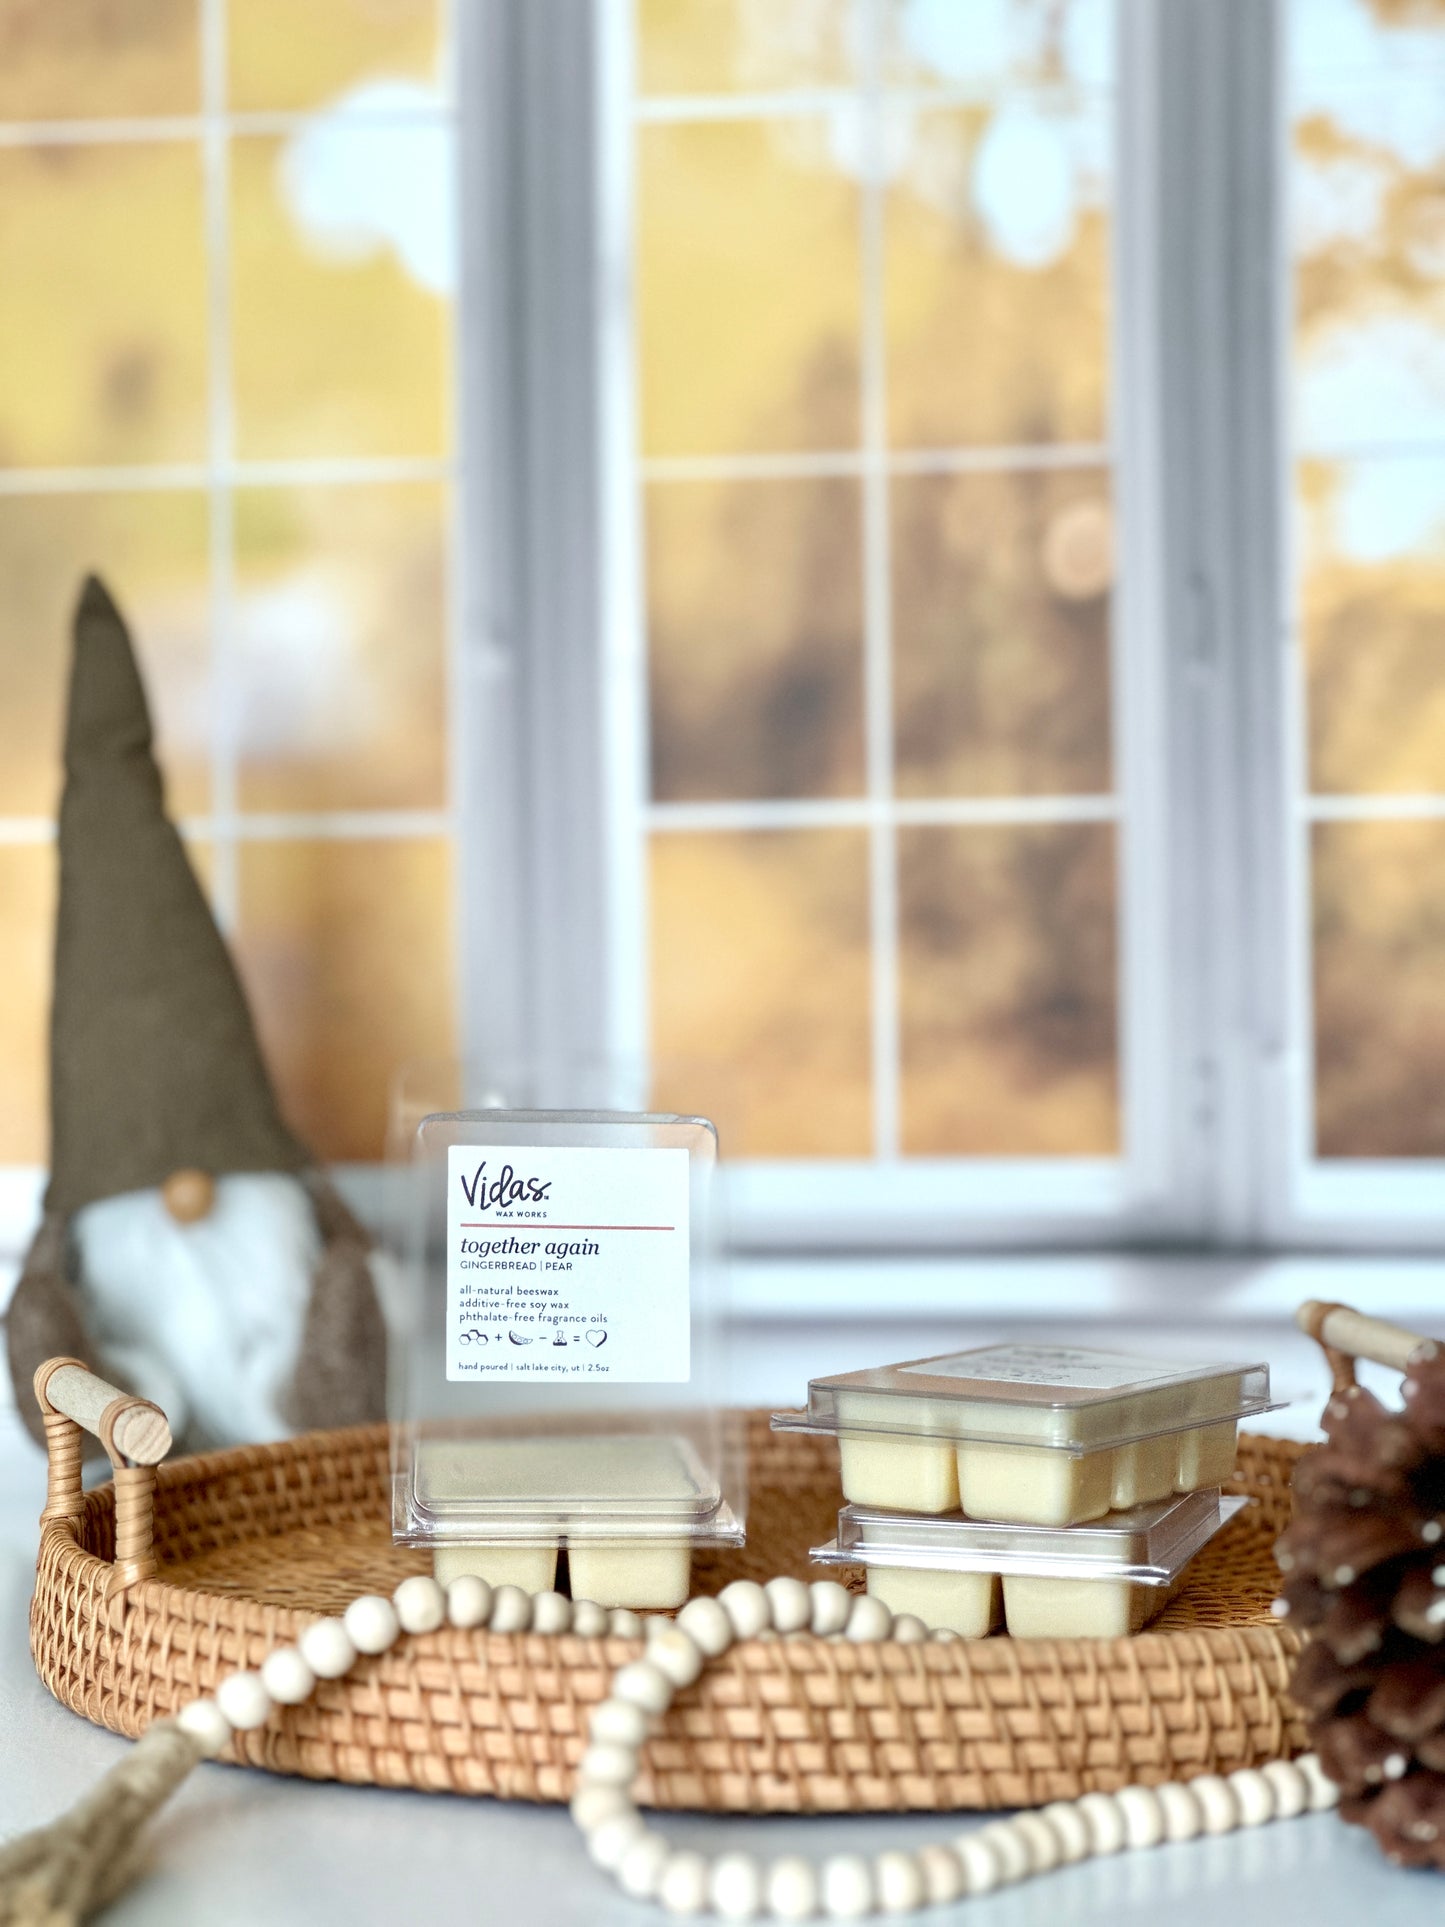 Embrace autumn's enchantment: Gingerbread and pear fragrance. An open 2.5oz clamshell sits on top of a wicker serving tray beside two stacked clamshell packages. A string of beads and a pinecone adorn the foreground, while a charming brown gnome lends whimsy to the scene against the backdrop of blurred yellow fall leaves outside a window.